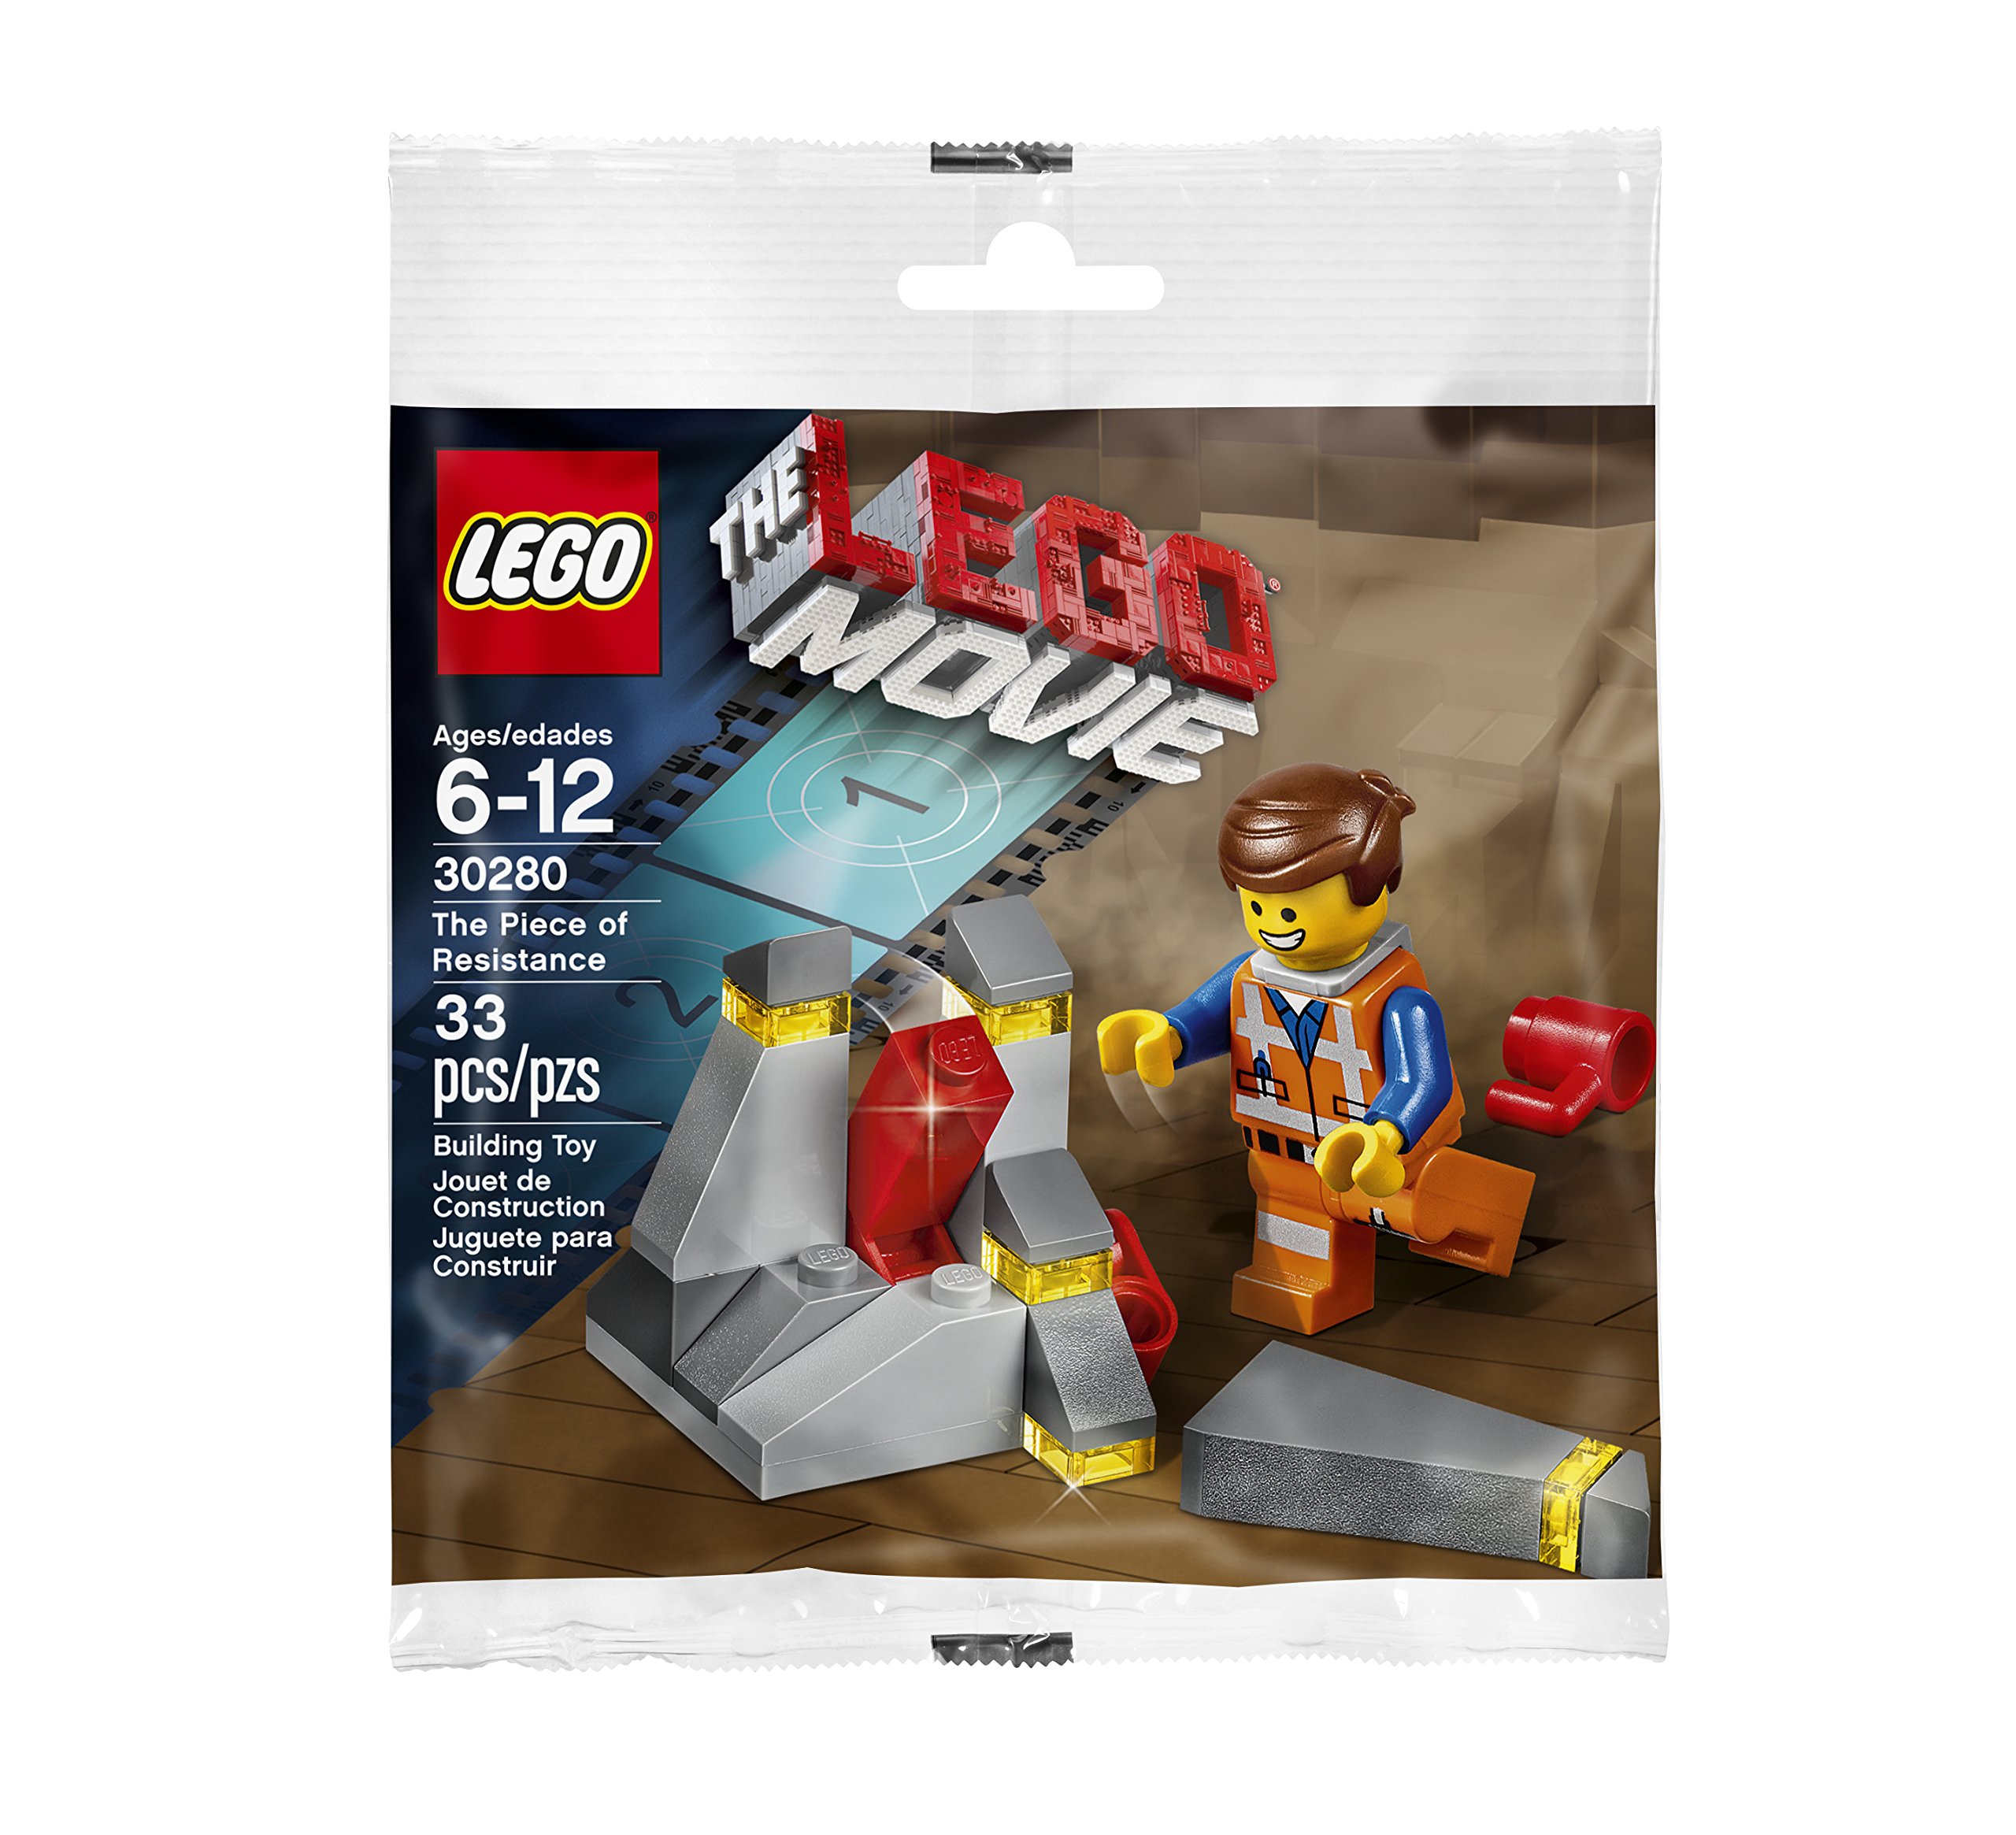 Lego The Movie The Piece Of Resistance Promotional Product